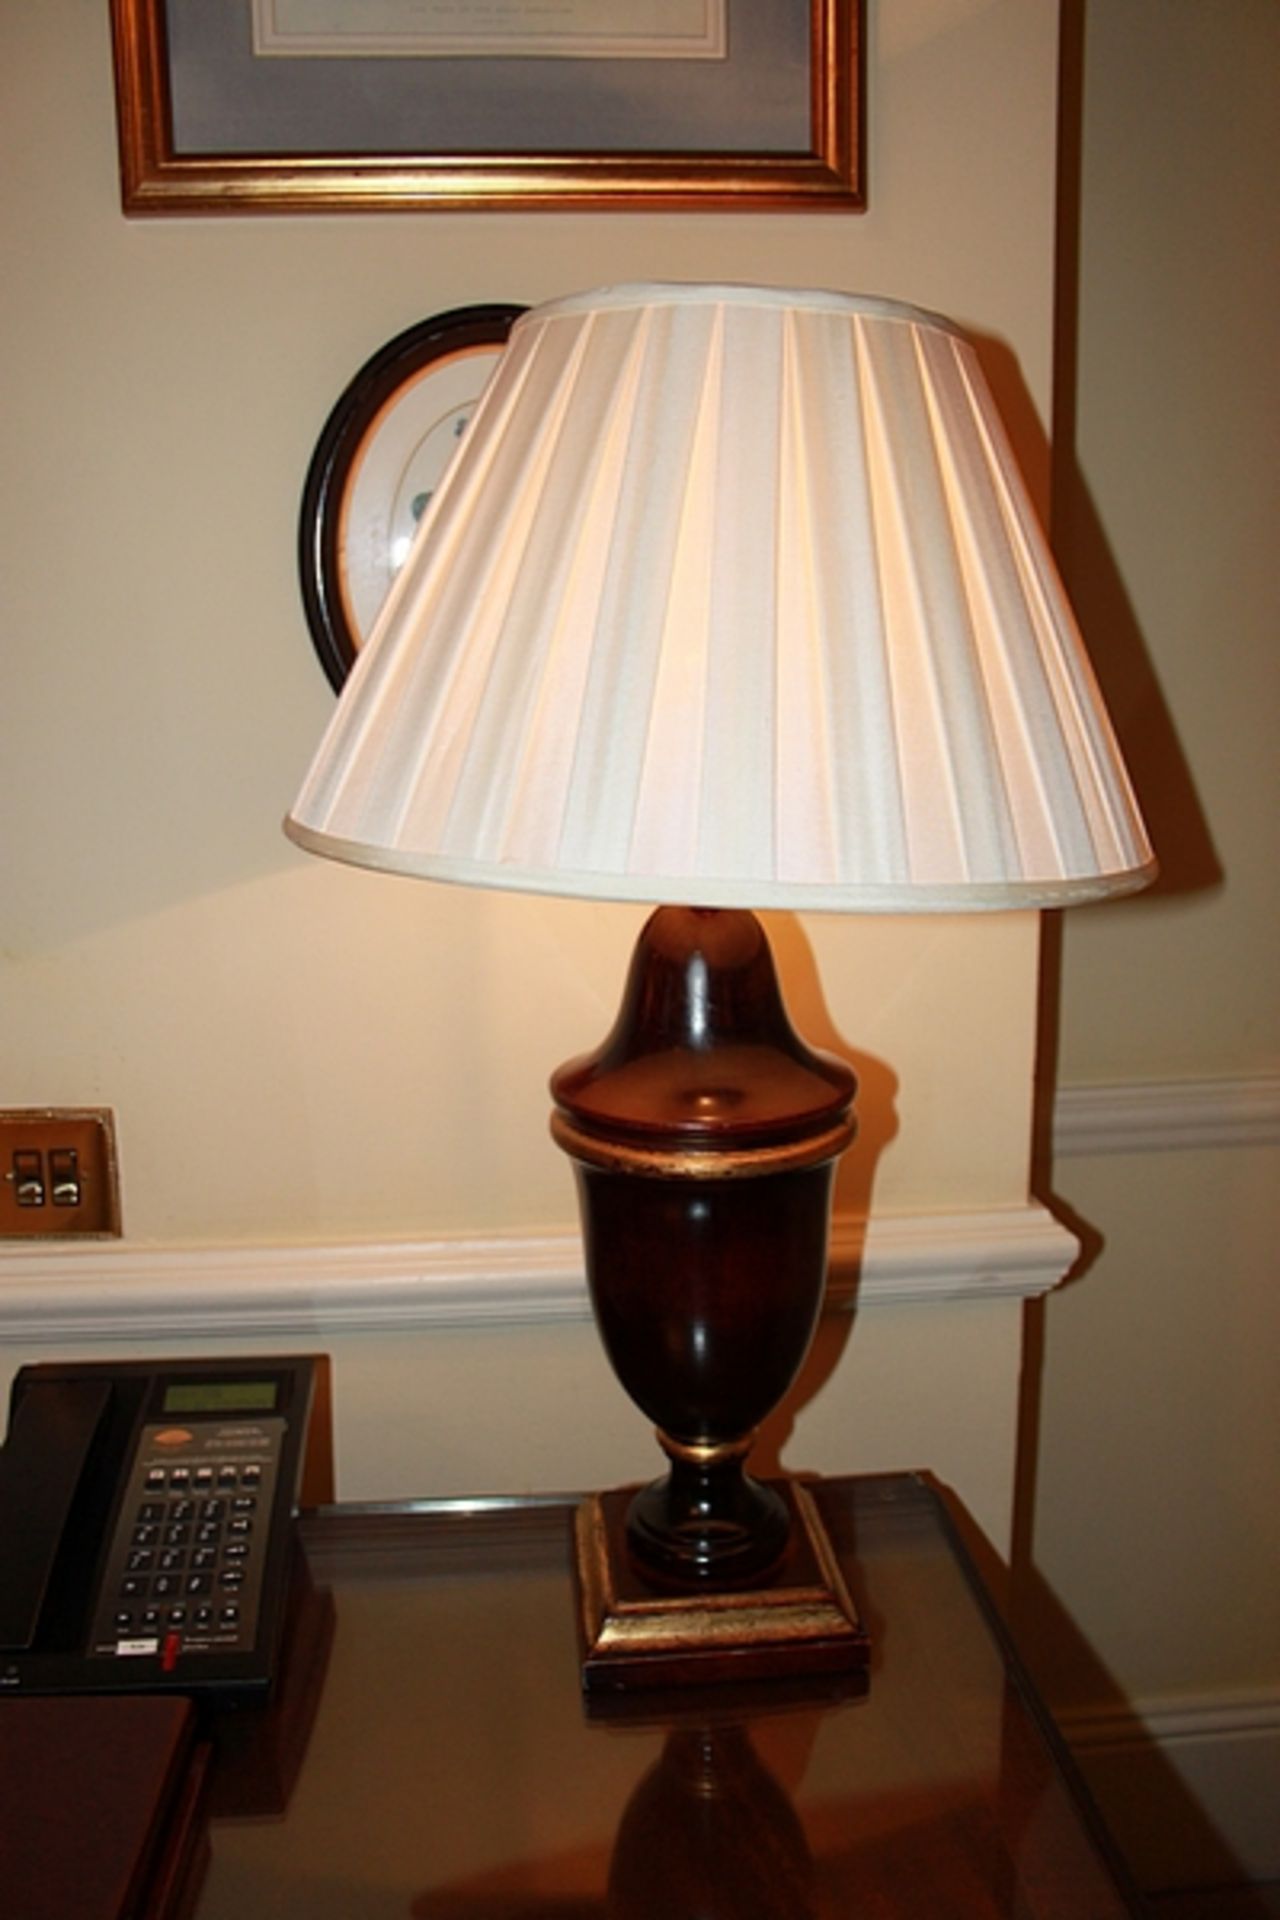 3 x large urn shaped table lamps